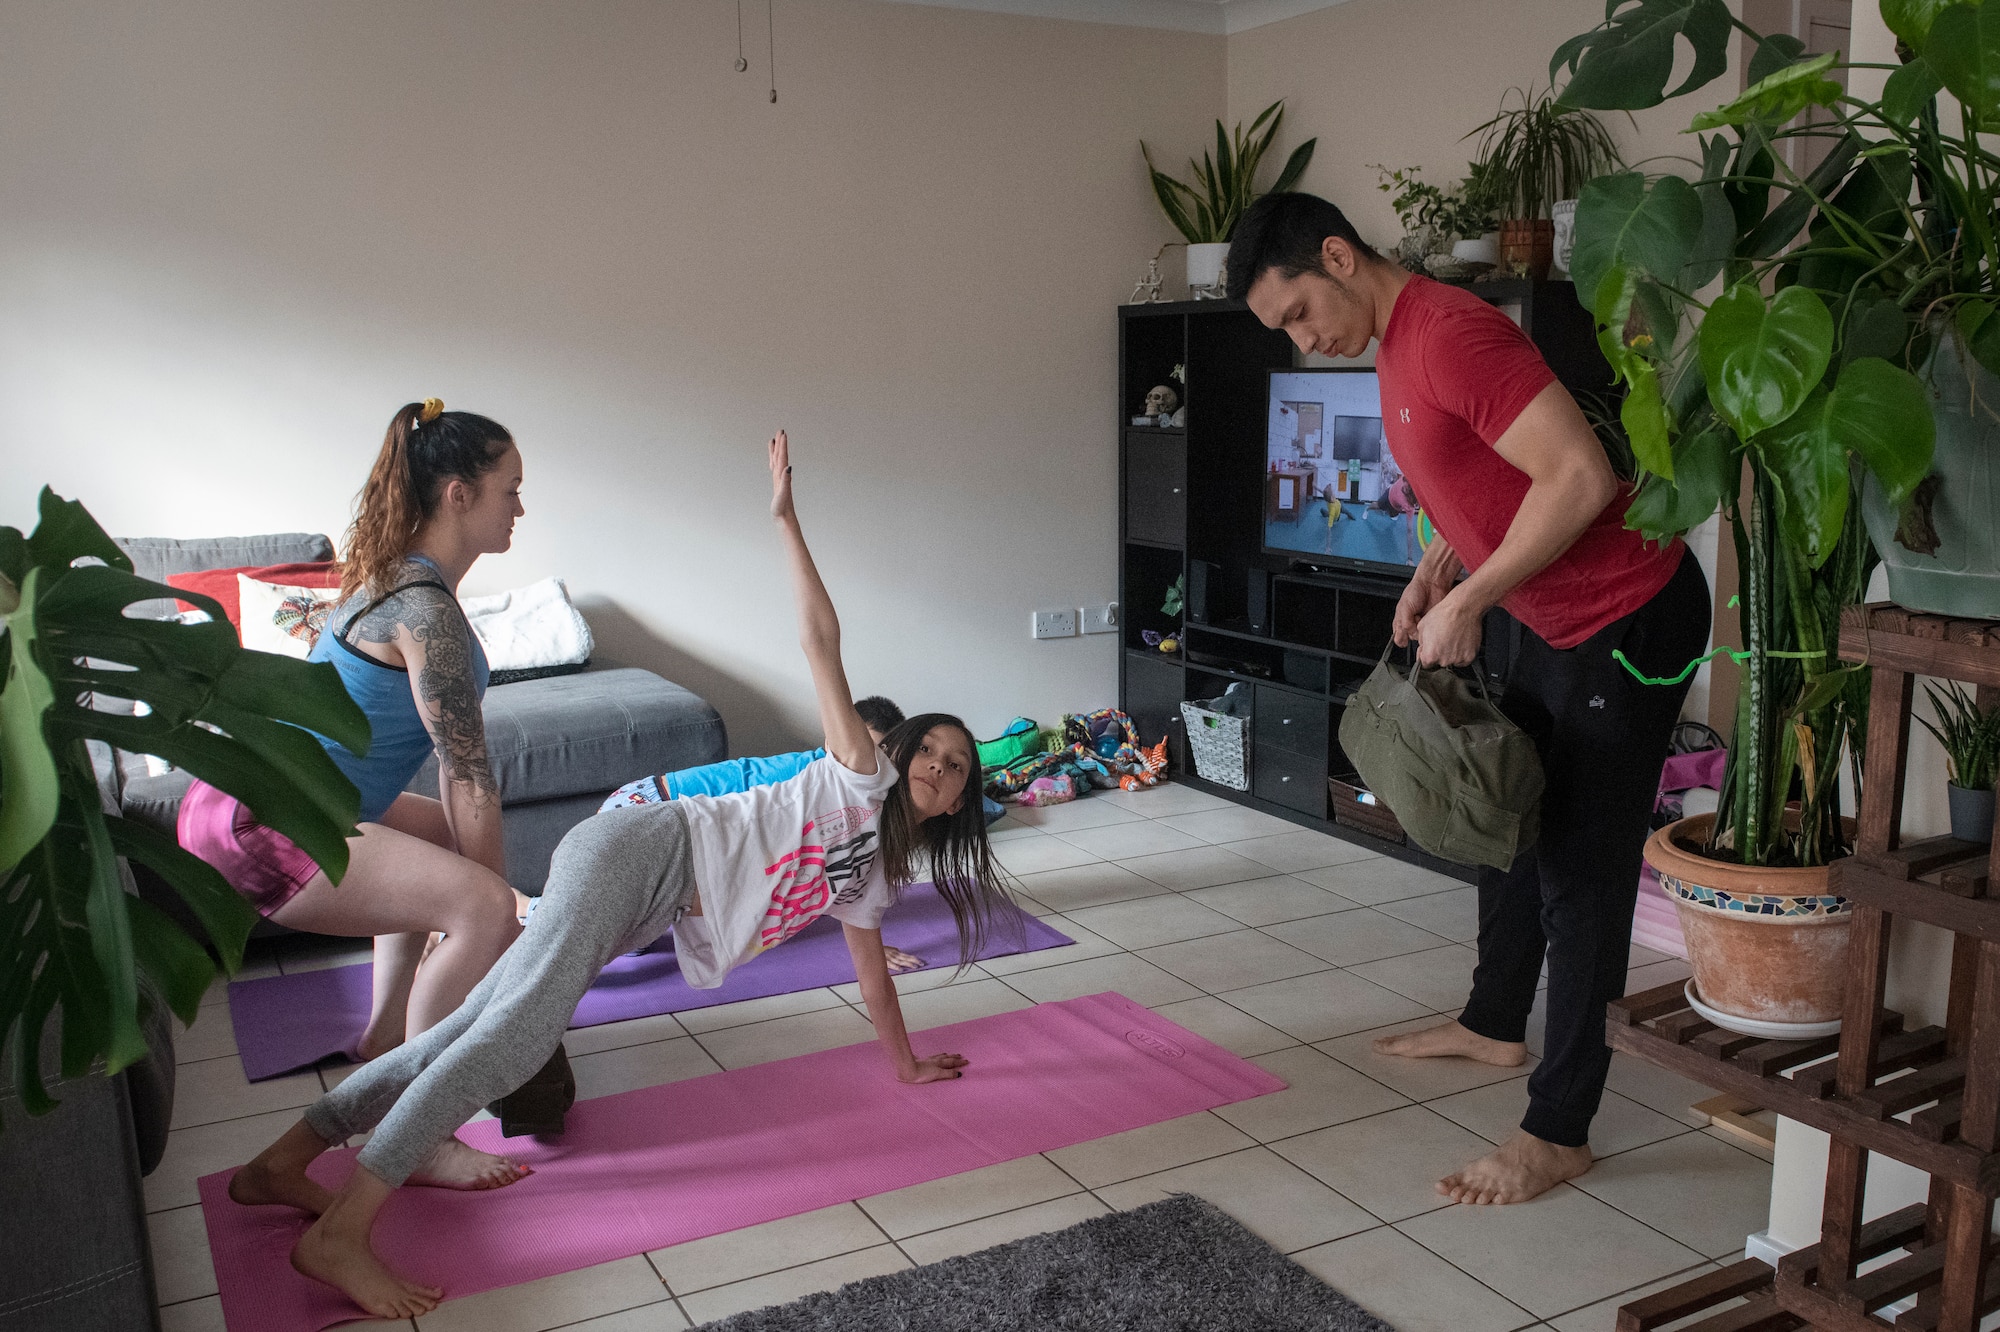 The Nuñez family works out together while being quarantined for two weeks at their home during the COVID-19 outbreak, April 2, 2020. Total force fitness can play an important role in resilience during stressful situations like the COVID-19 outbreak. (U.S. Air Force photo by Tech. Sgt. Emerson Nuñez)